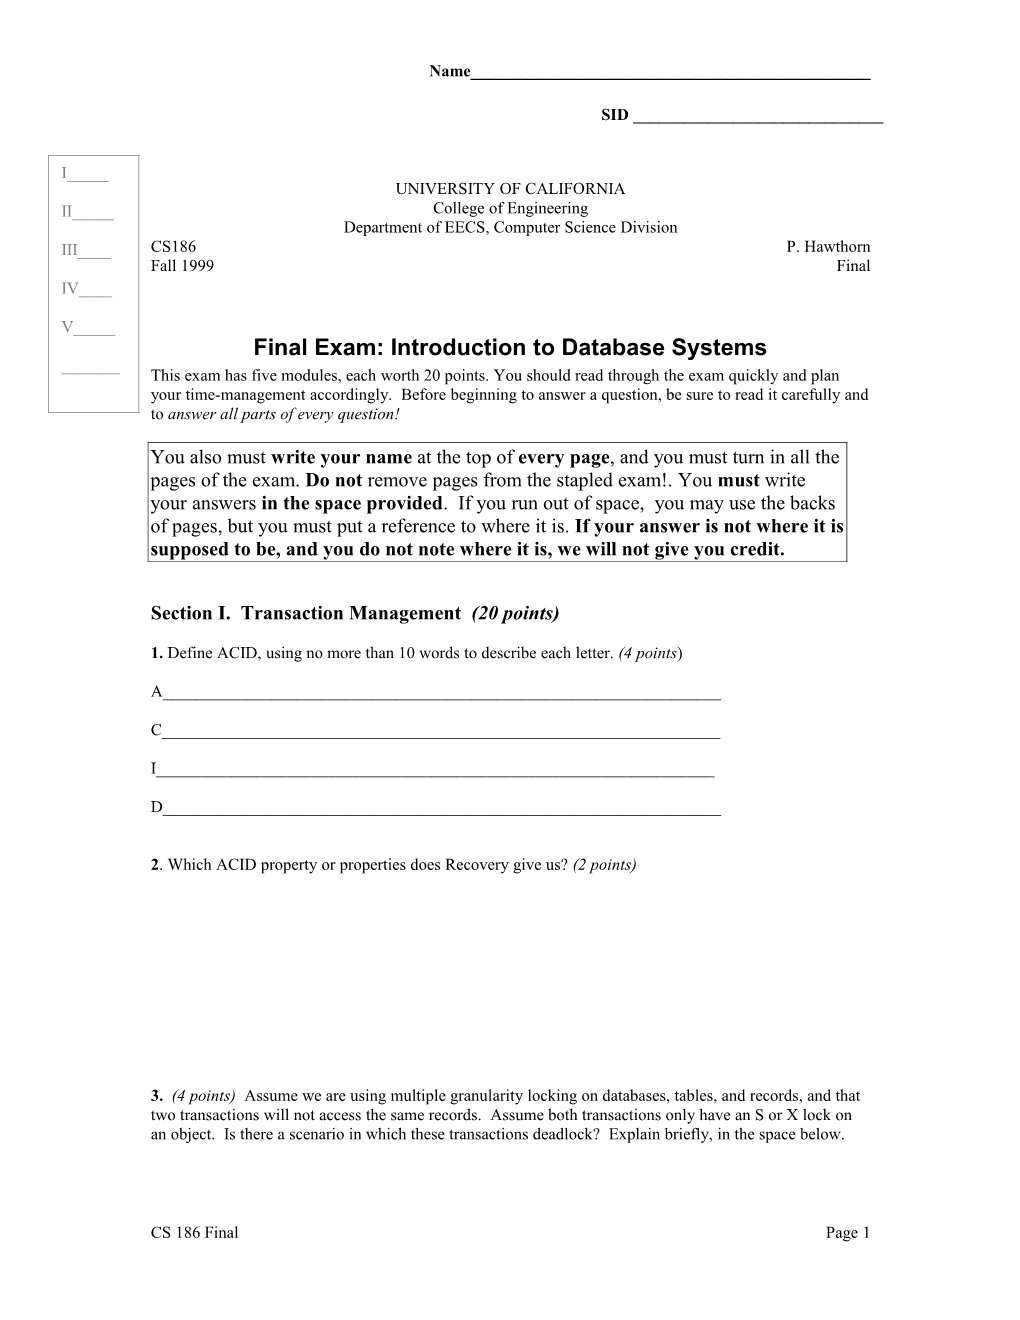 Final Exam: Introduction to Database Systems s1